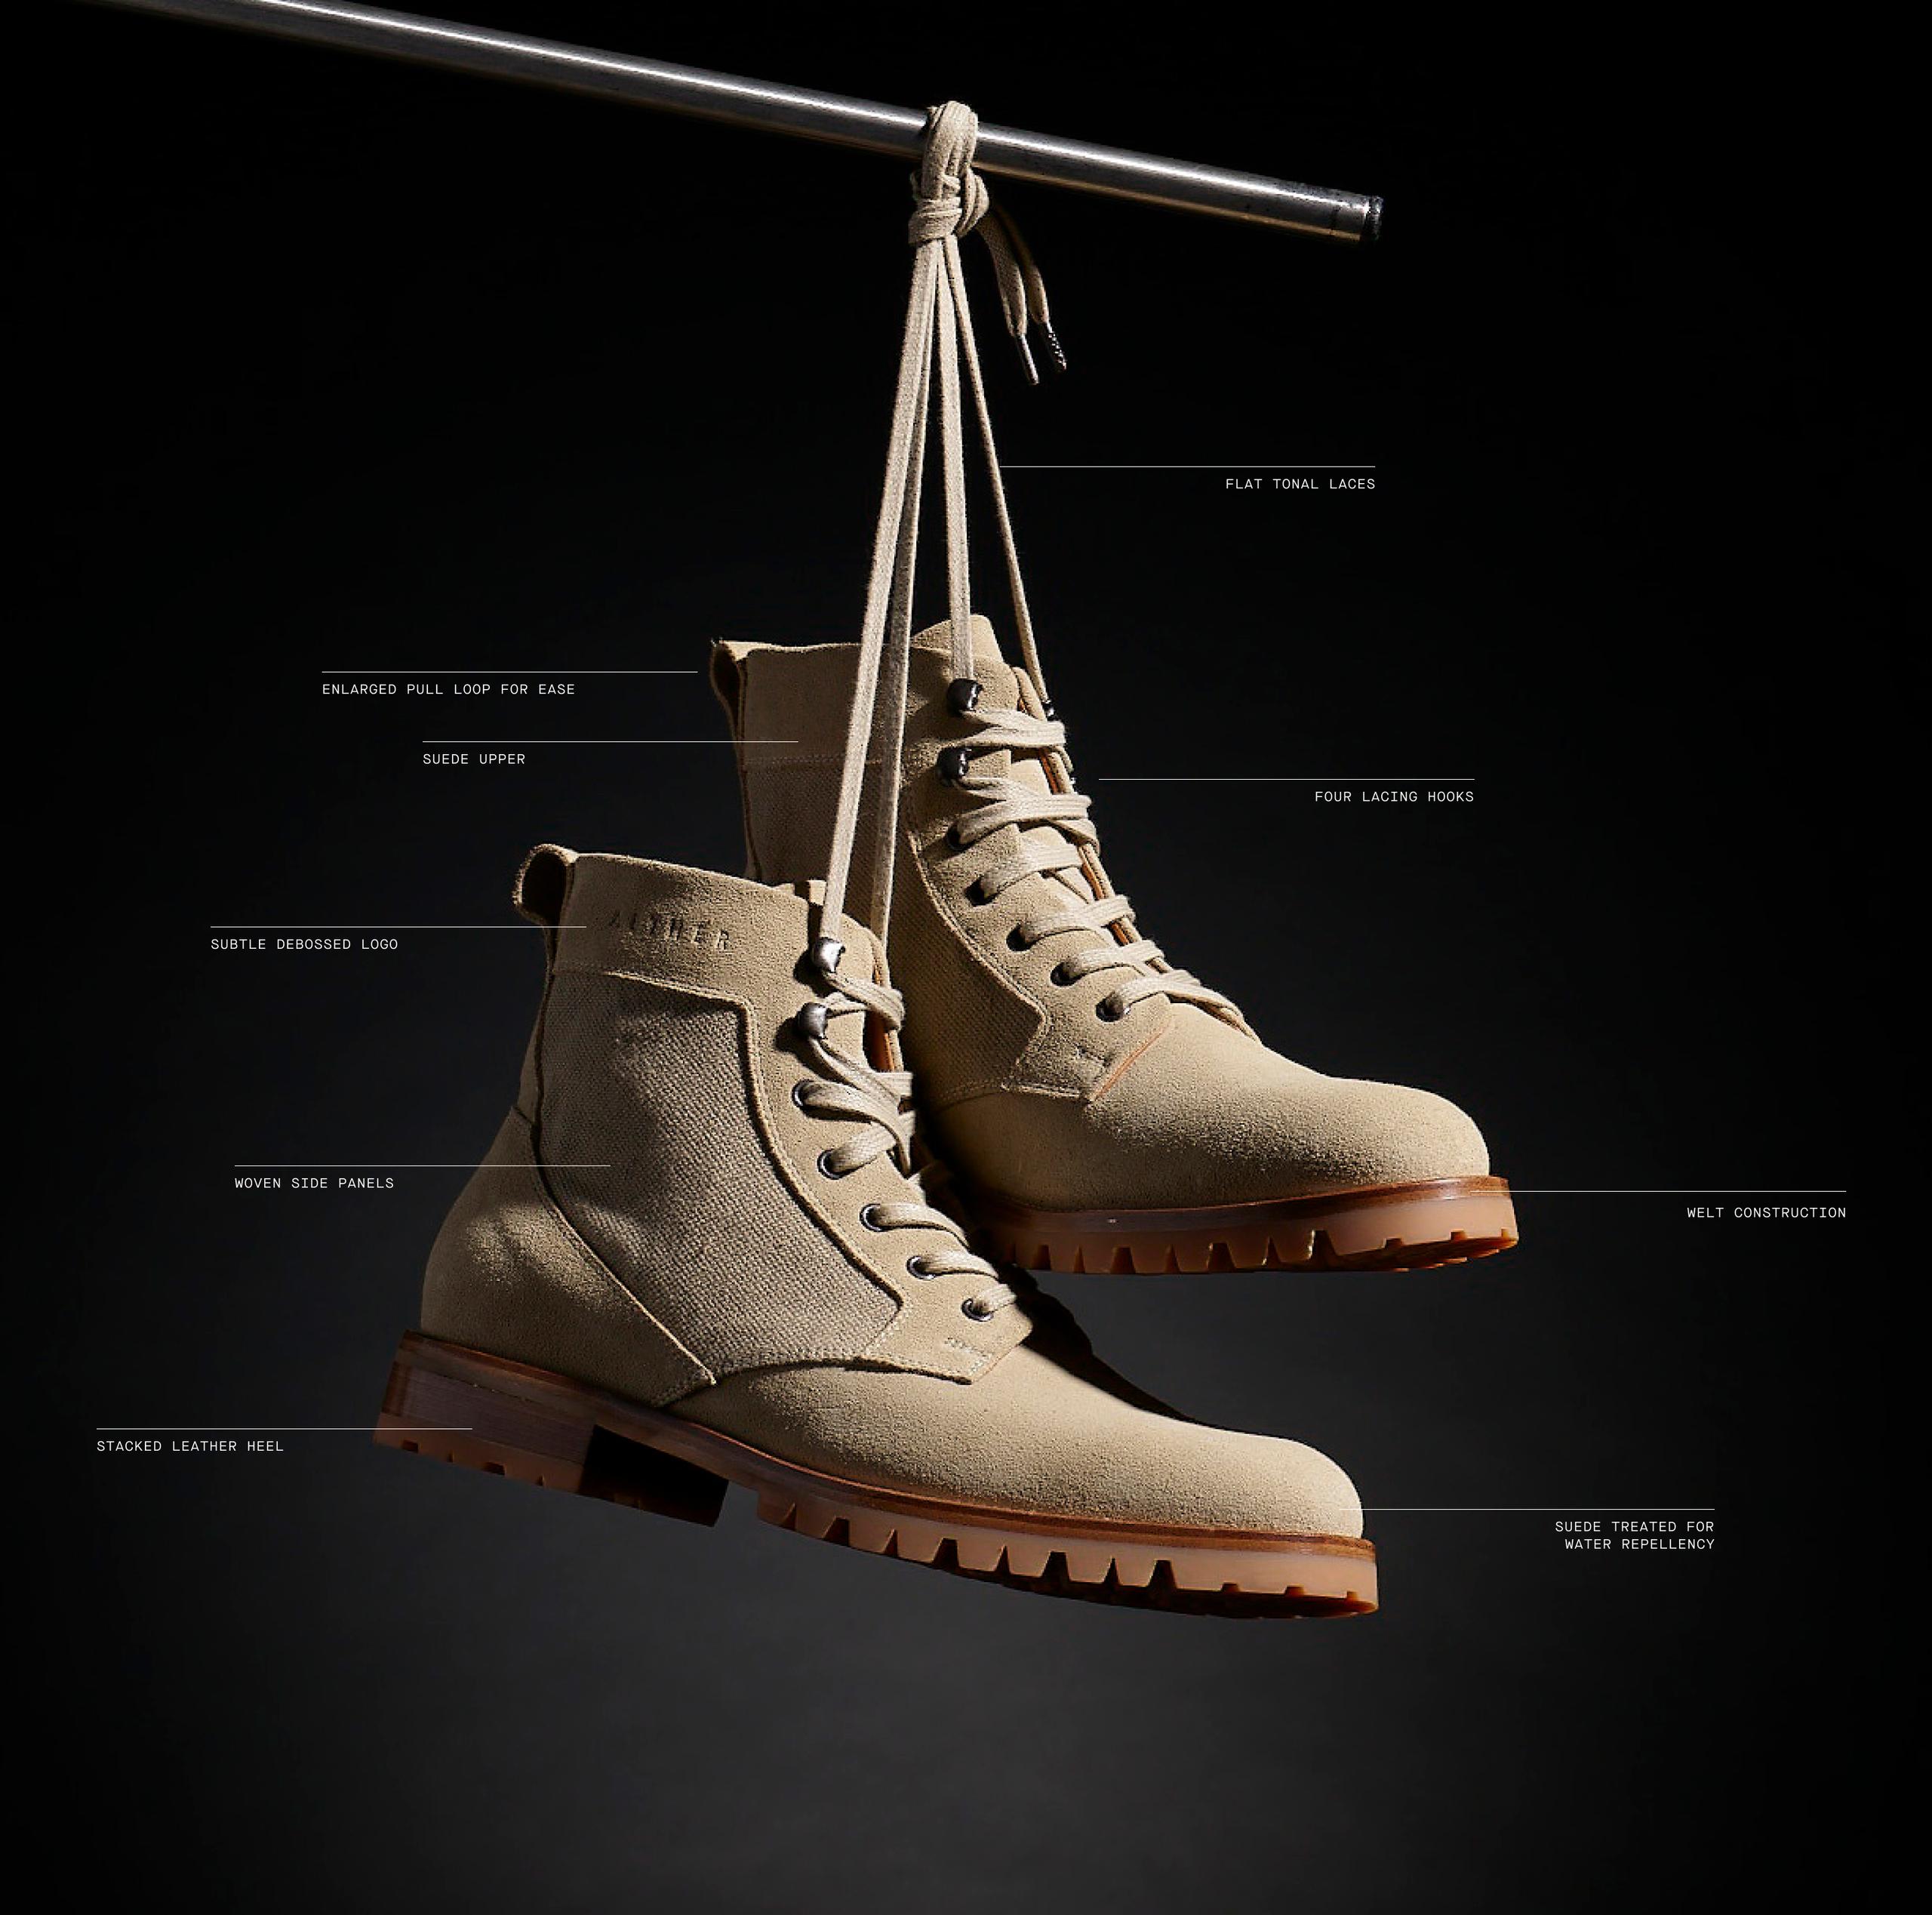 Ojai Boots hanging from laces in studio against black background